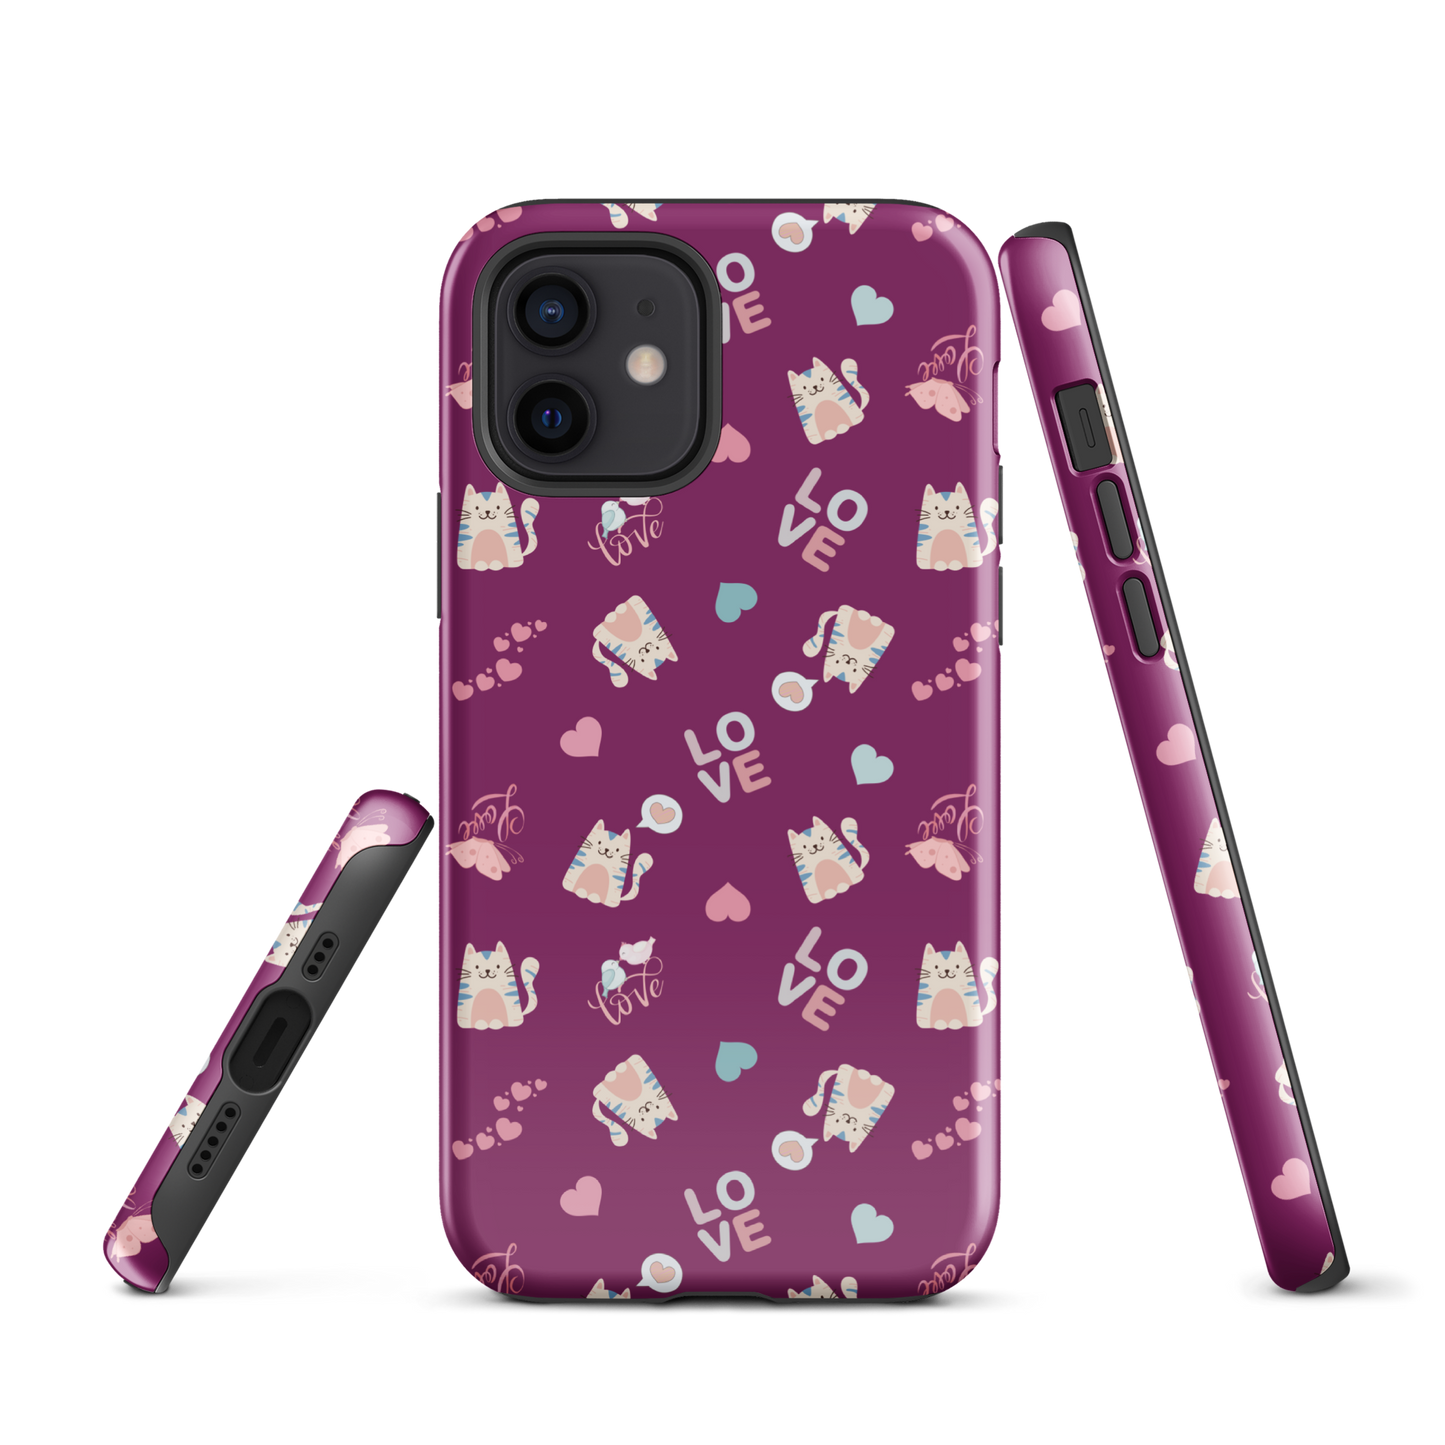 Tough case for iPhone 11, 12, 13, 14, 15 Variations | Adorable Cat Love Theme